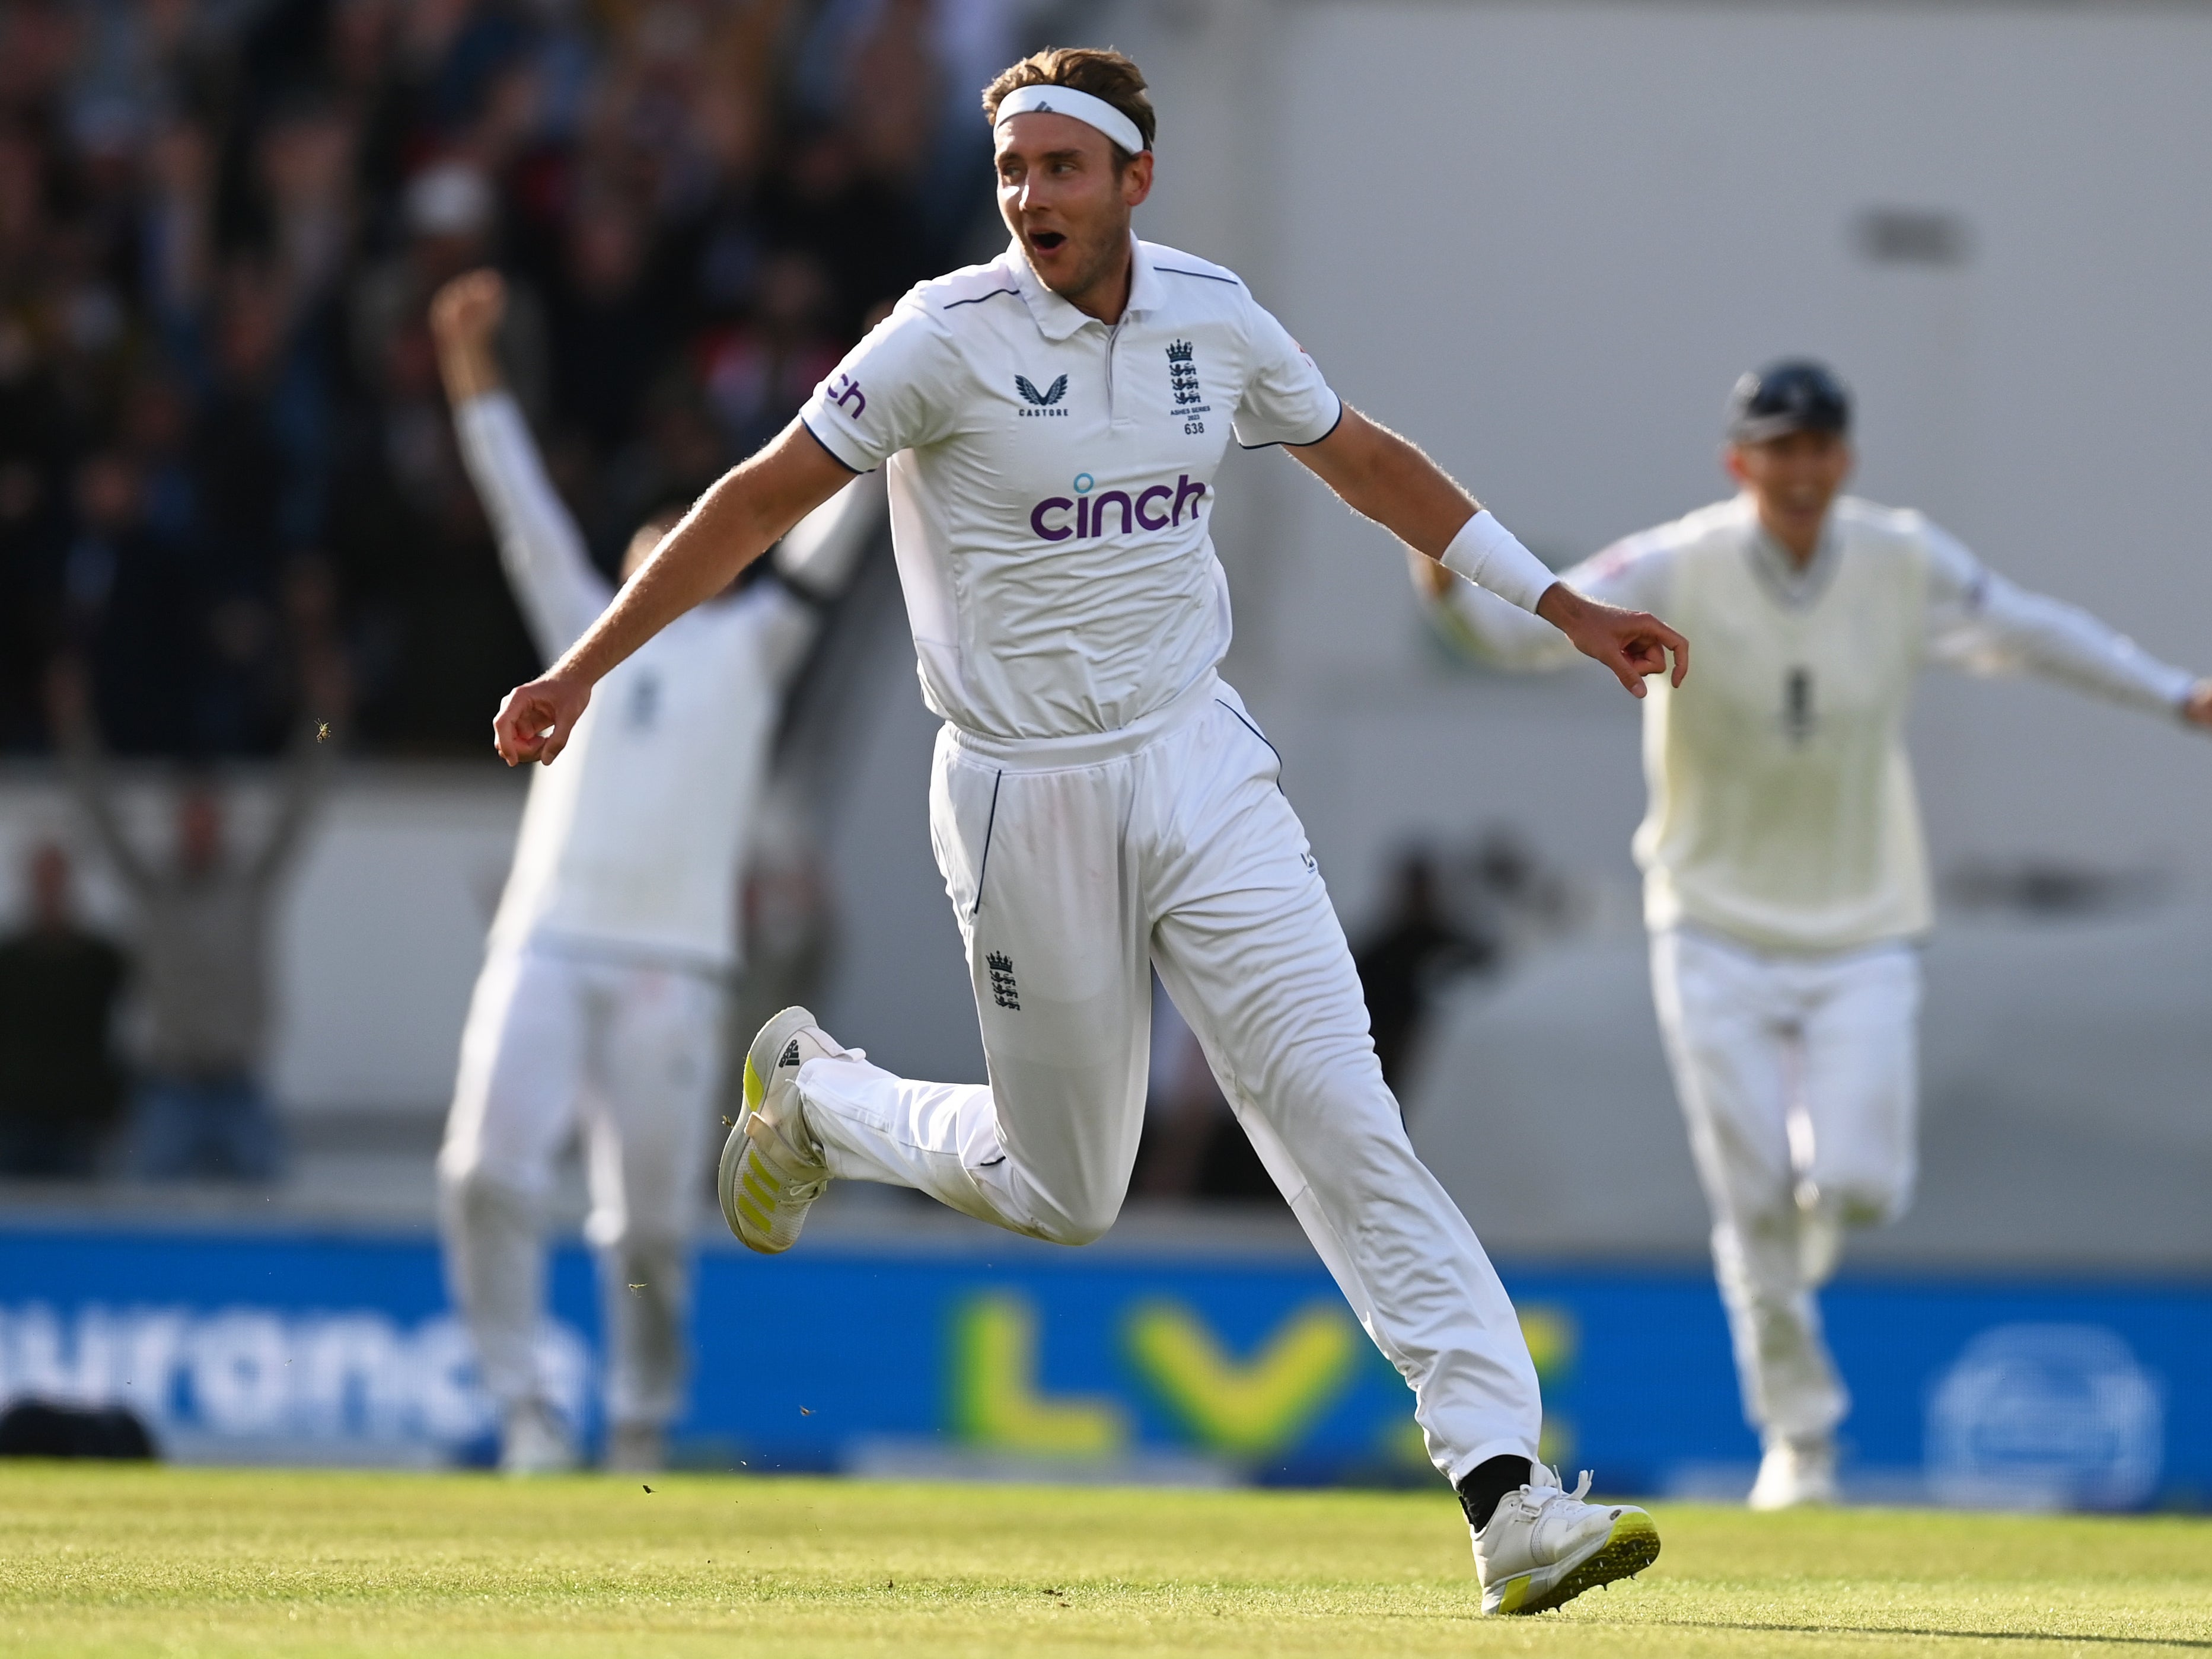 Stuart Broad celebrates after taking the final wicket of the series